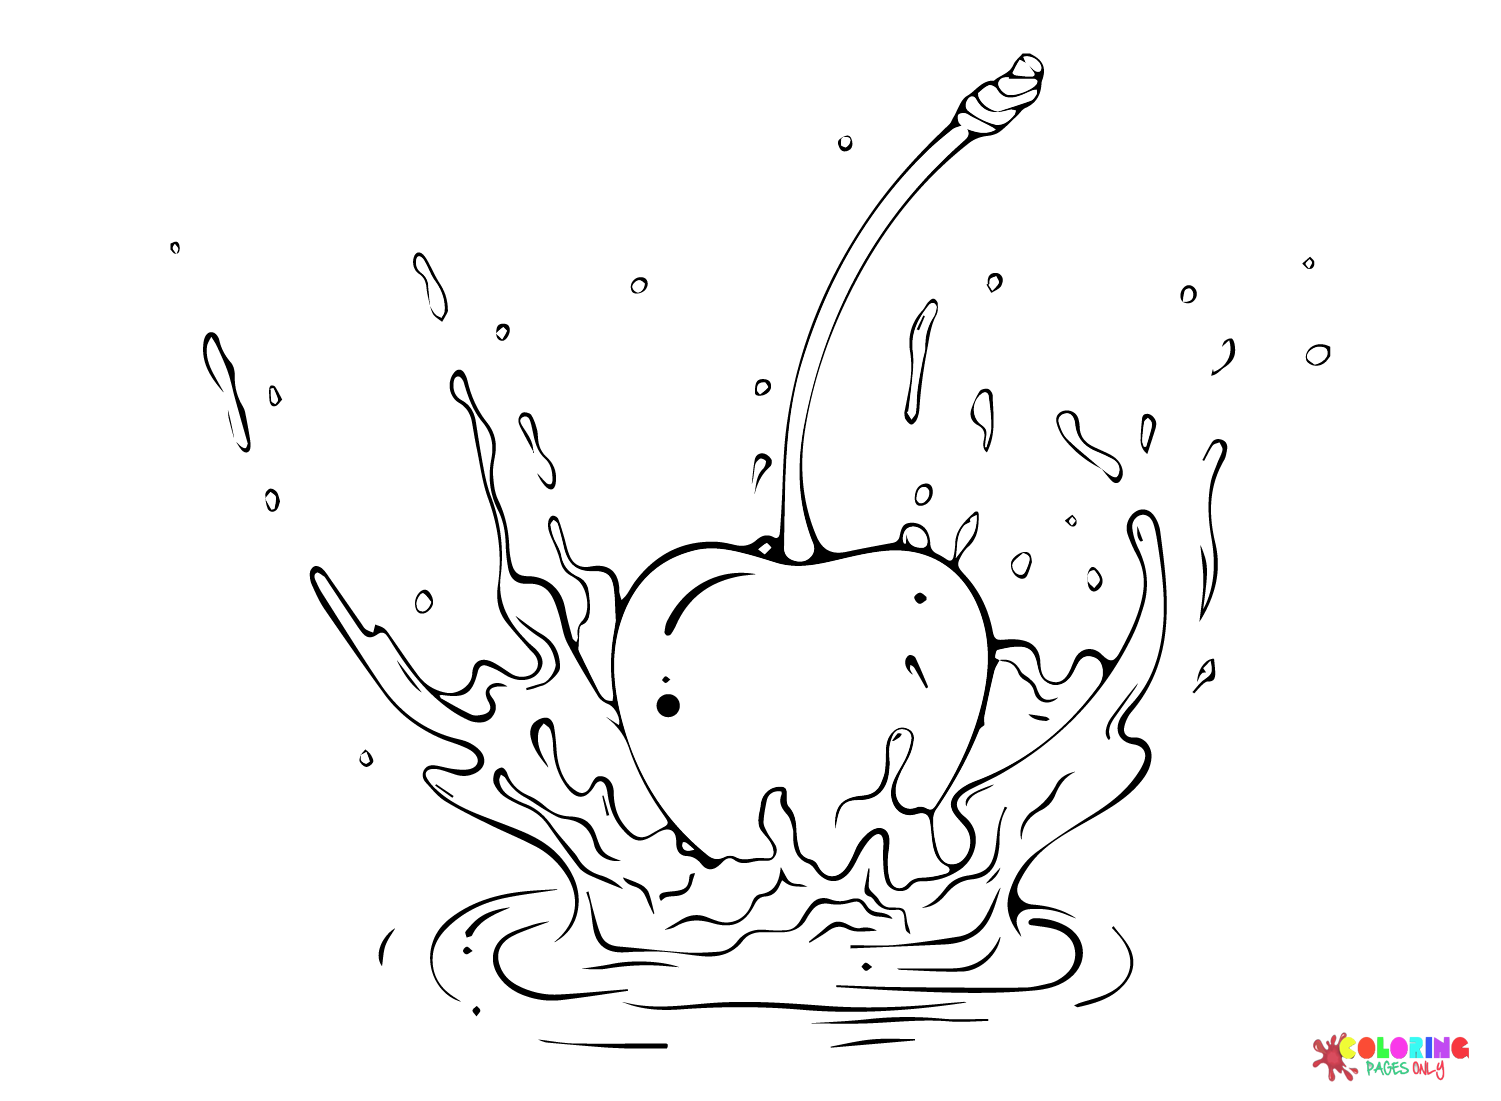 Cherry to Print Coloring Page